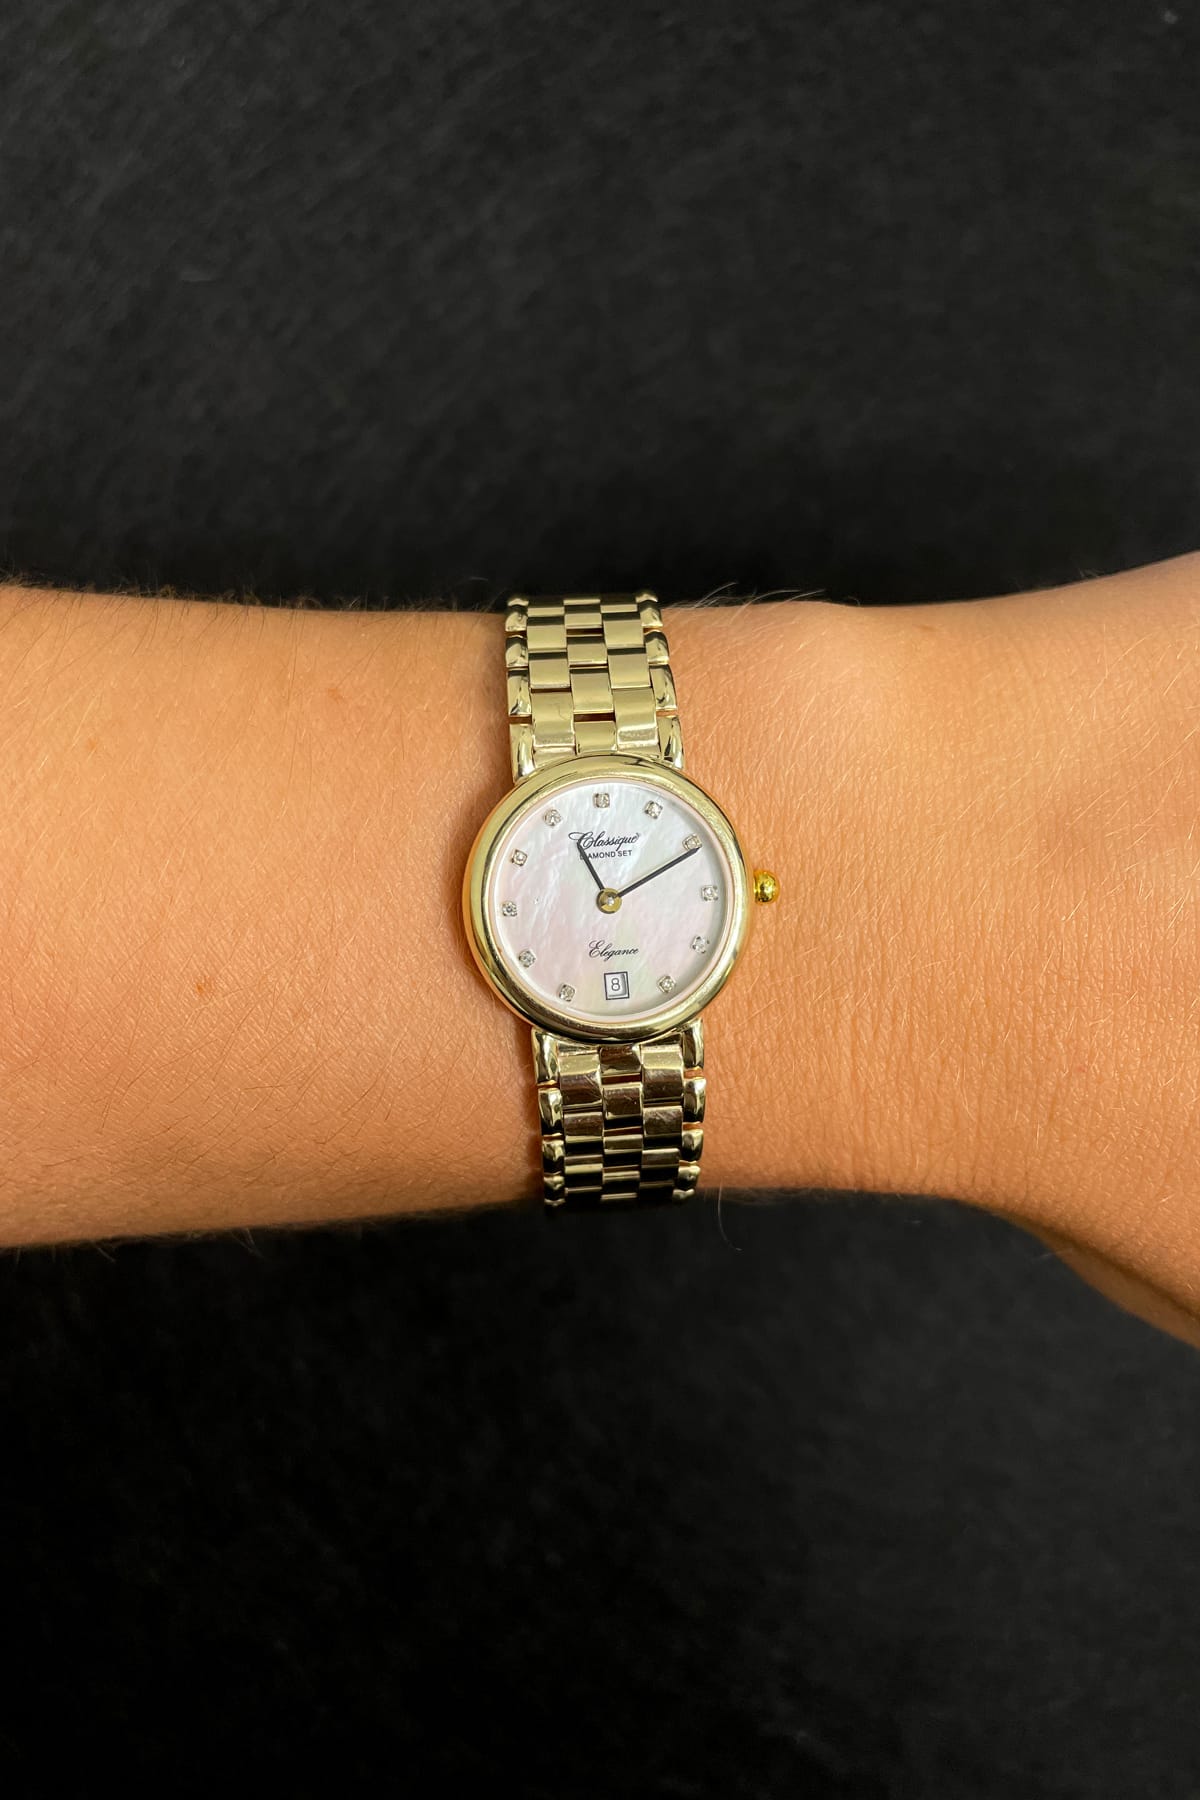 Amelie Mother of Pearl Diamond Set 9ct Solid Yellow Gold Classique Swiss Watch available at LeGassick Diamonds and Jewellery Gold Coast, Australia.